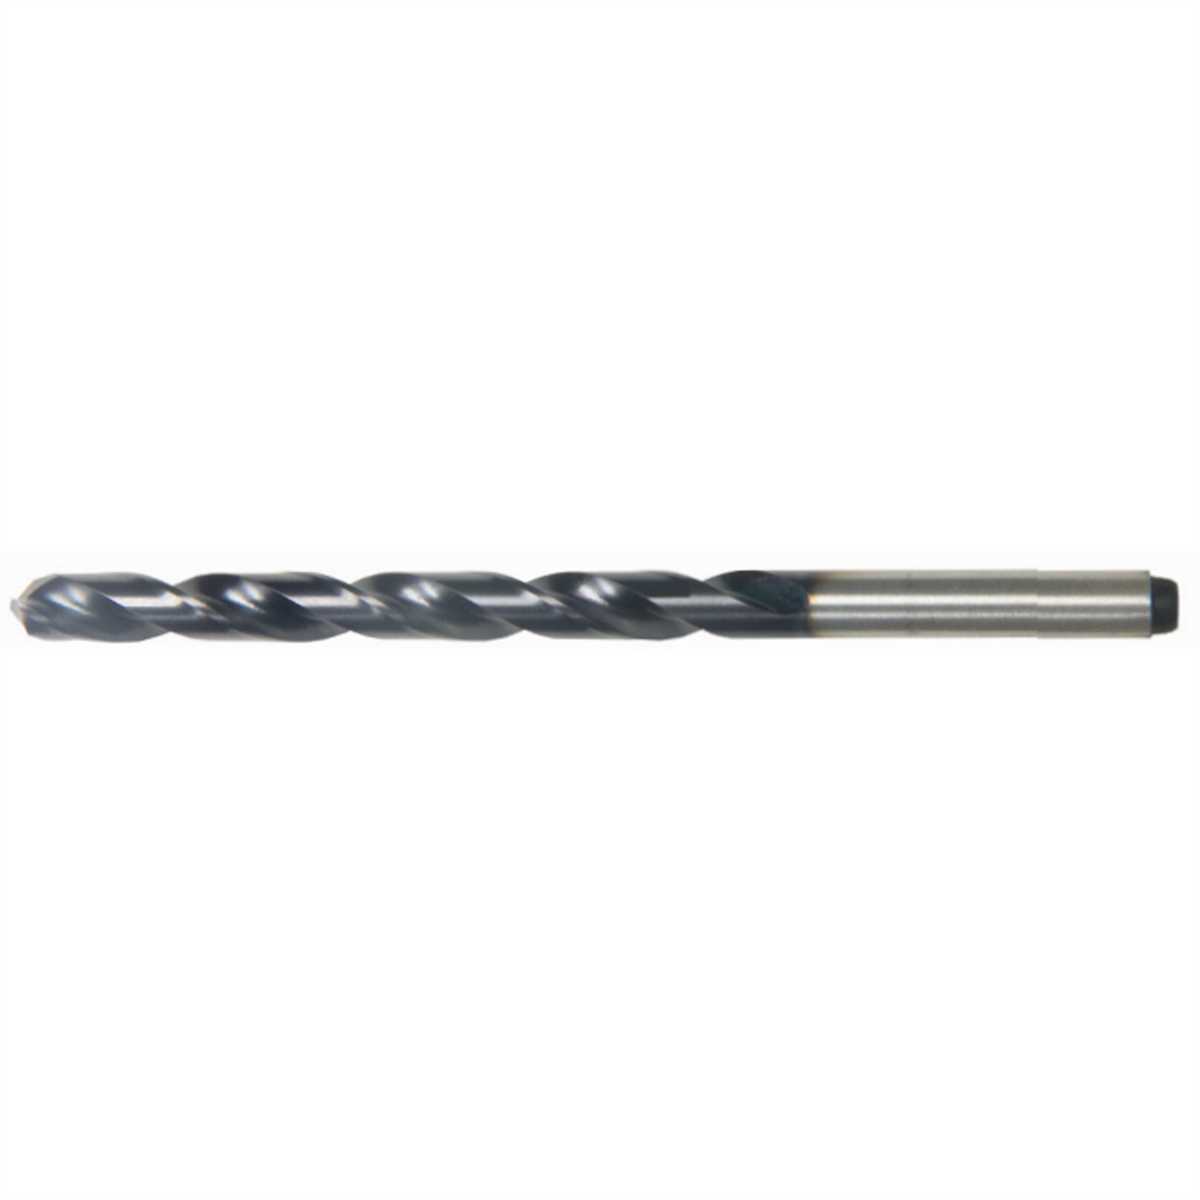 Choosing the Right Carbide Tipped Bit: